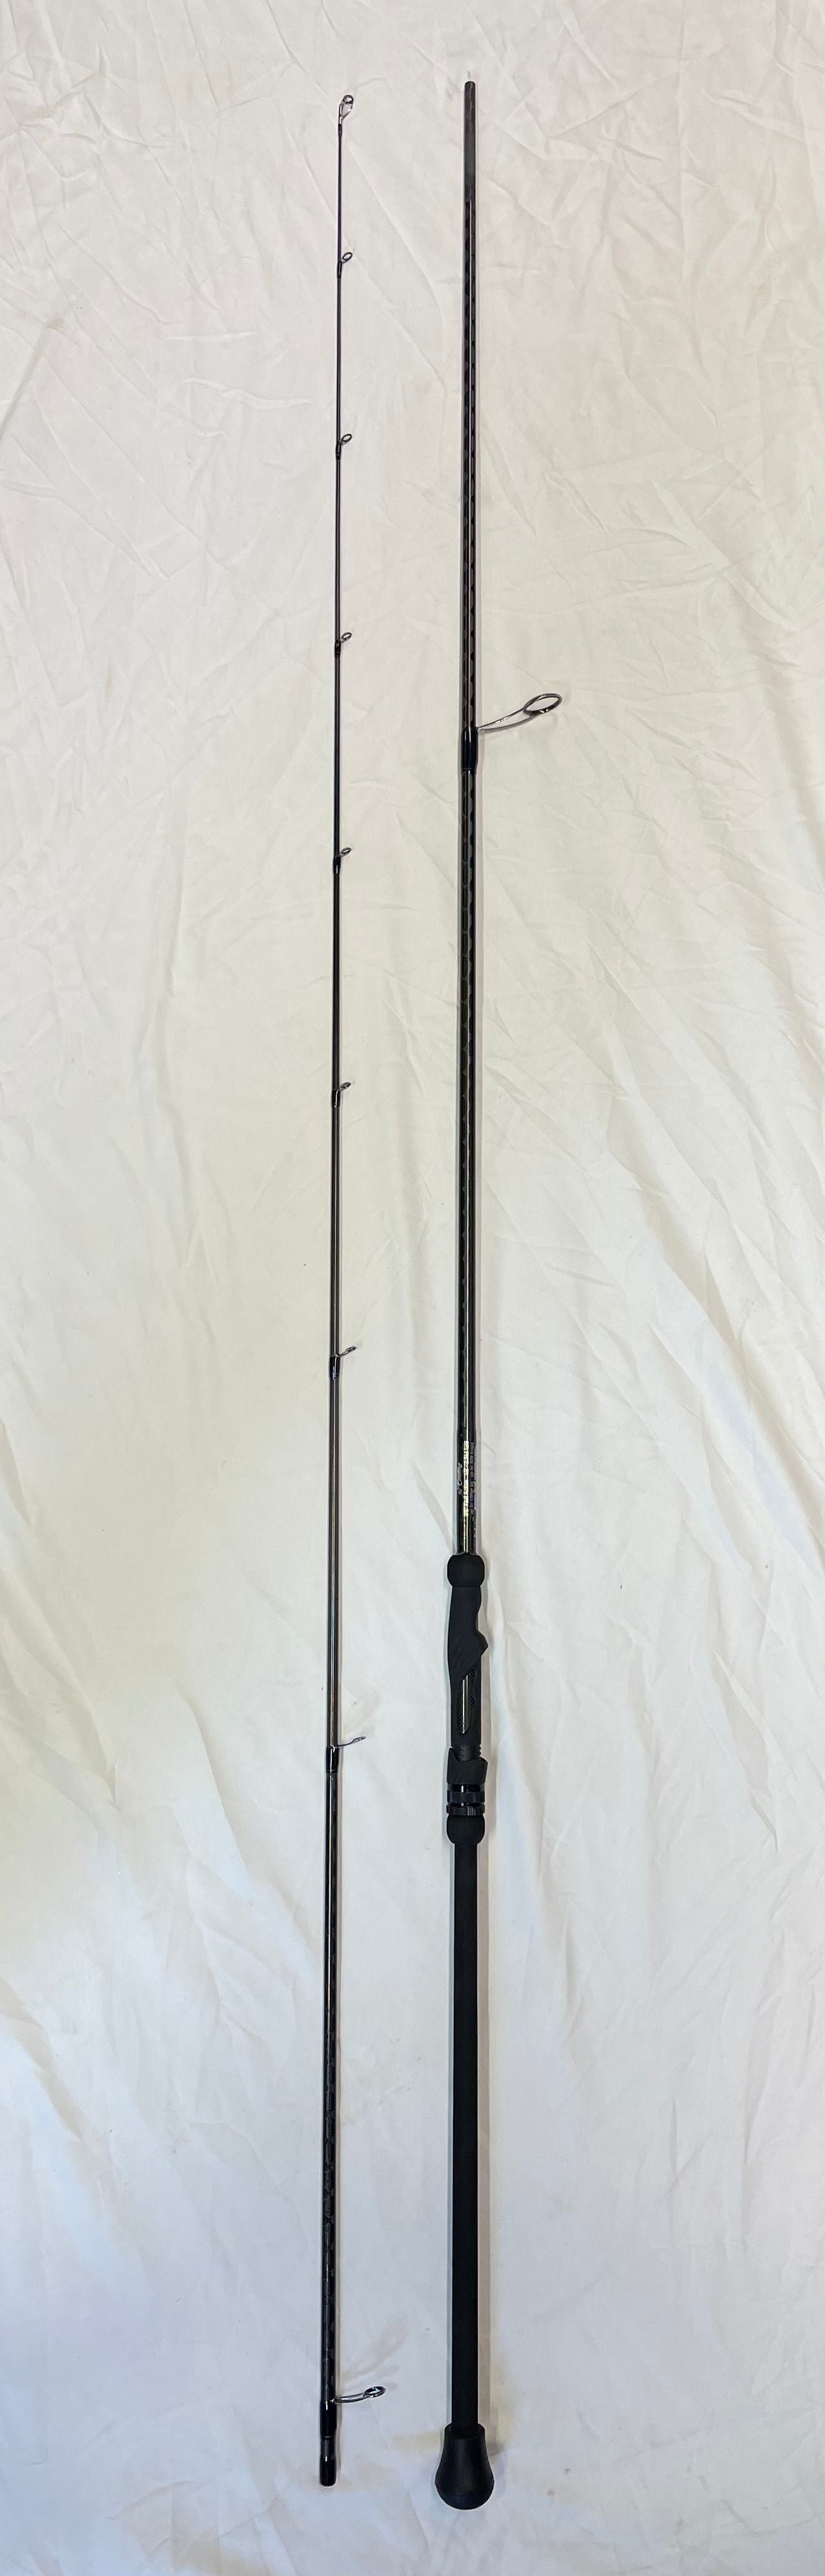 Fiberglass Spinning Rod Fishing Rods & Poles with 7 Guides and 2 Pieces for  sale